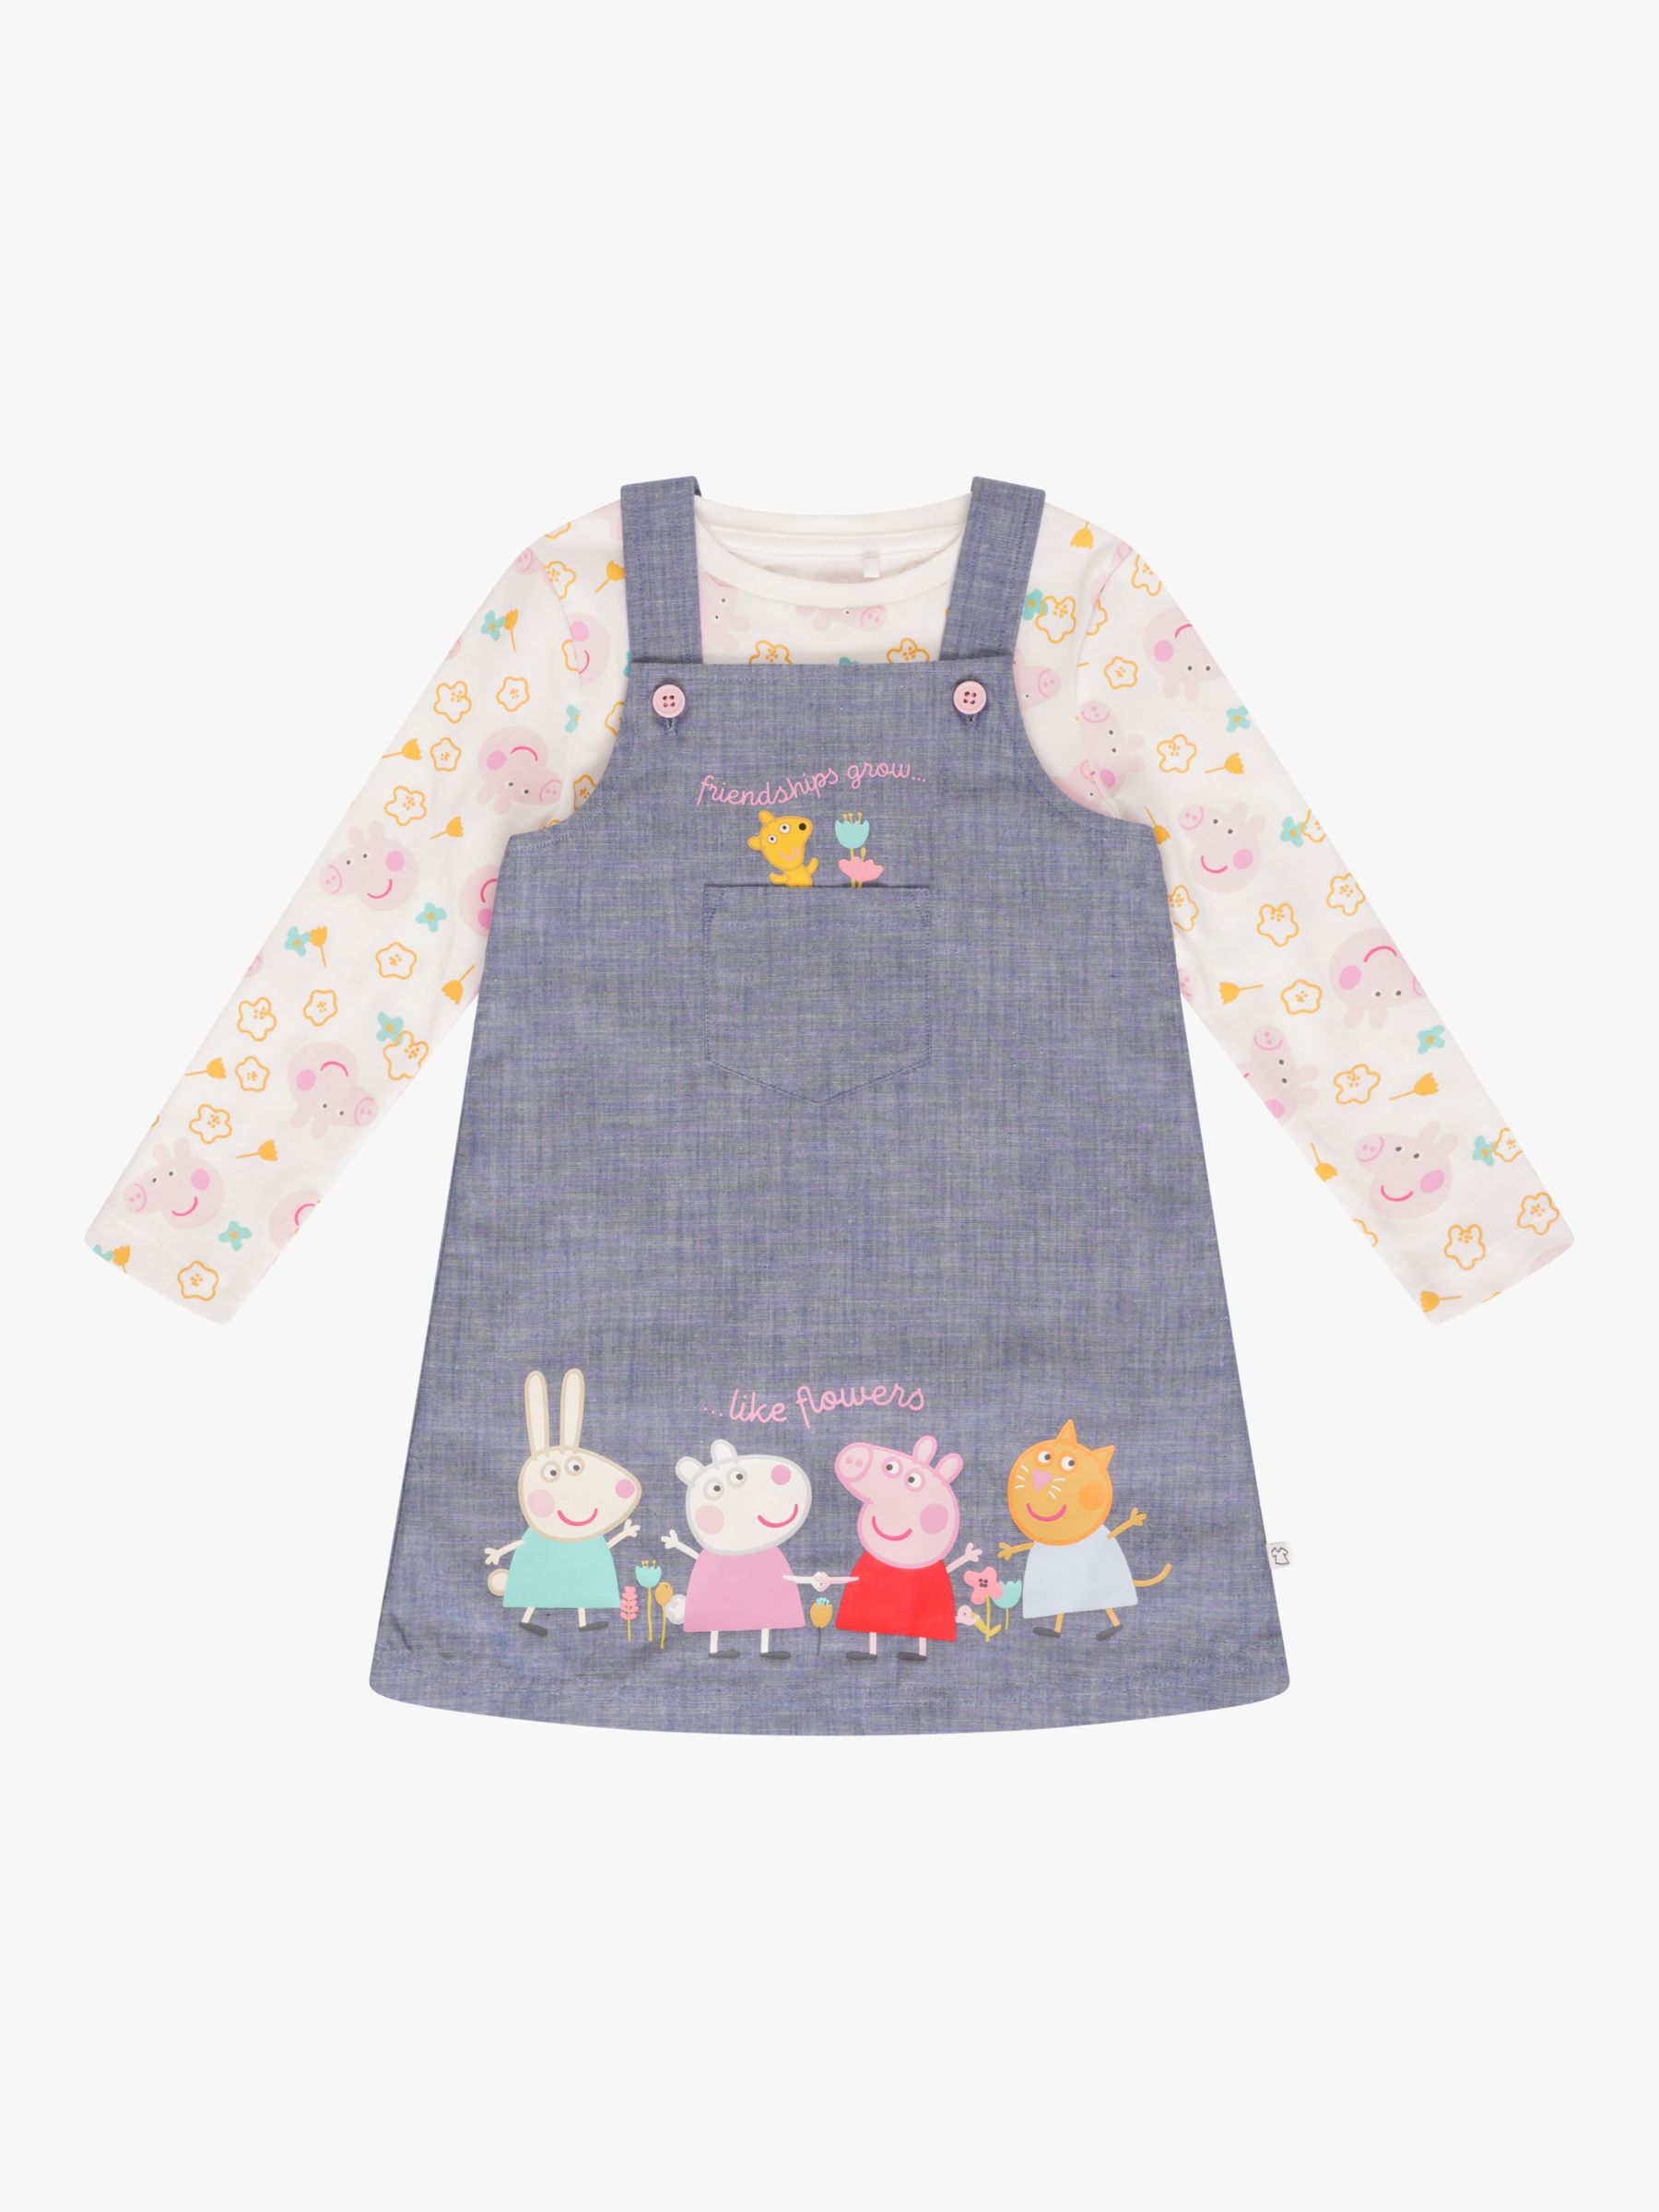 Toddler Girl In Denim Overalls And A Big Sun Hat Feeding Pigs On A